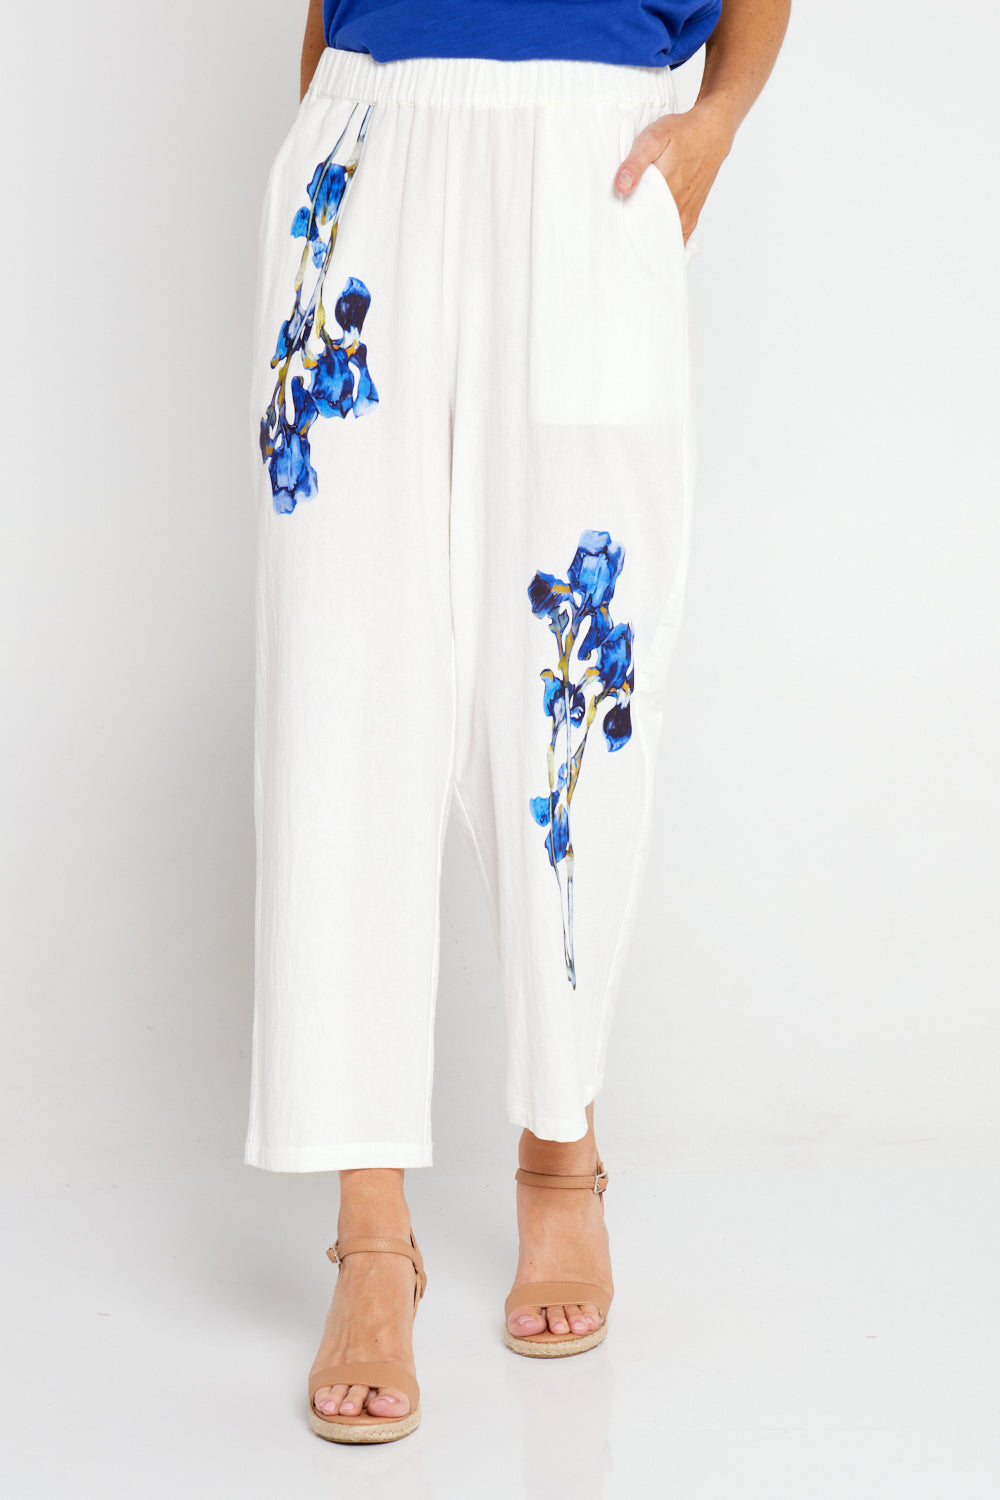 Upcycled Print Pants - White/Blue Floral